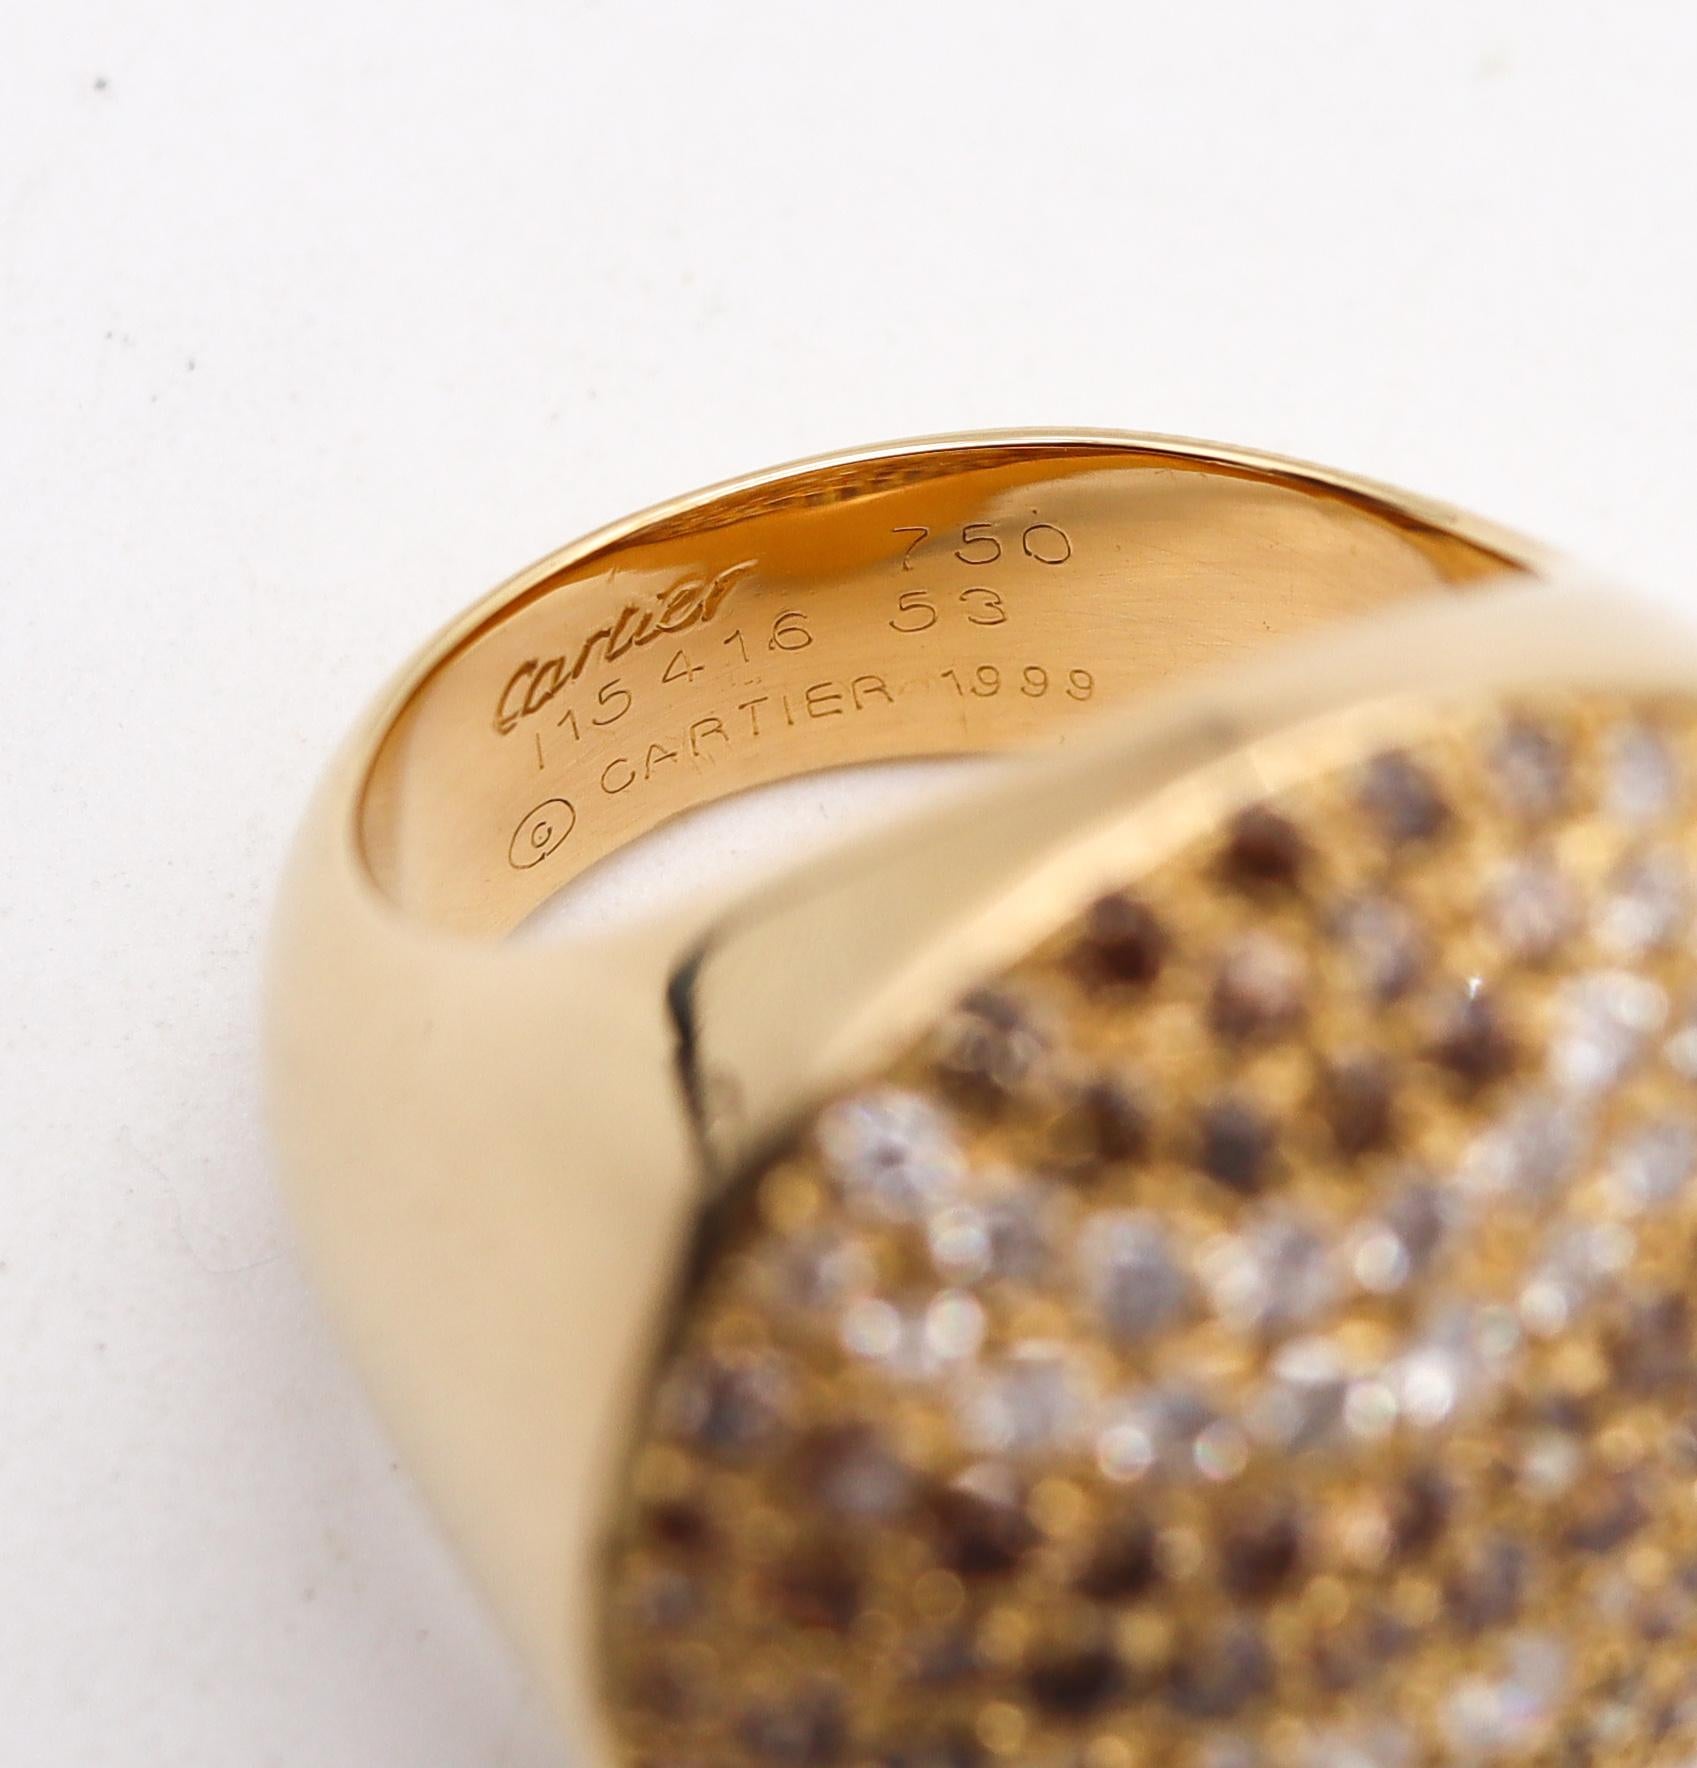 Brilliant Cut Cartier Paris Jeton Sauvage Cocktail Ring 18Kt Yellow Gold with 3.18 Ctw Diamond For Sale